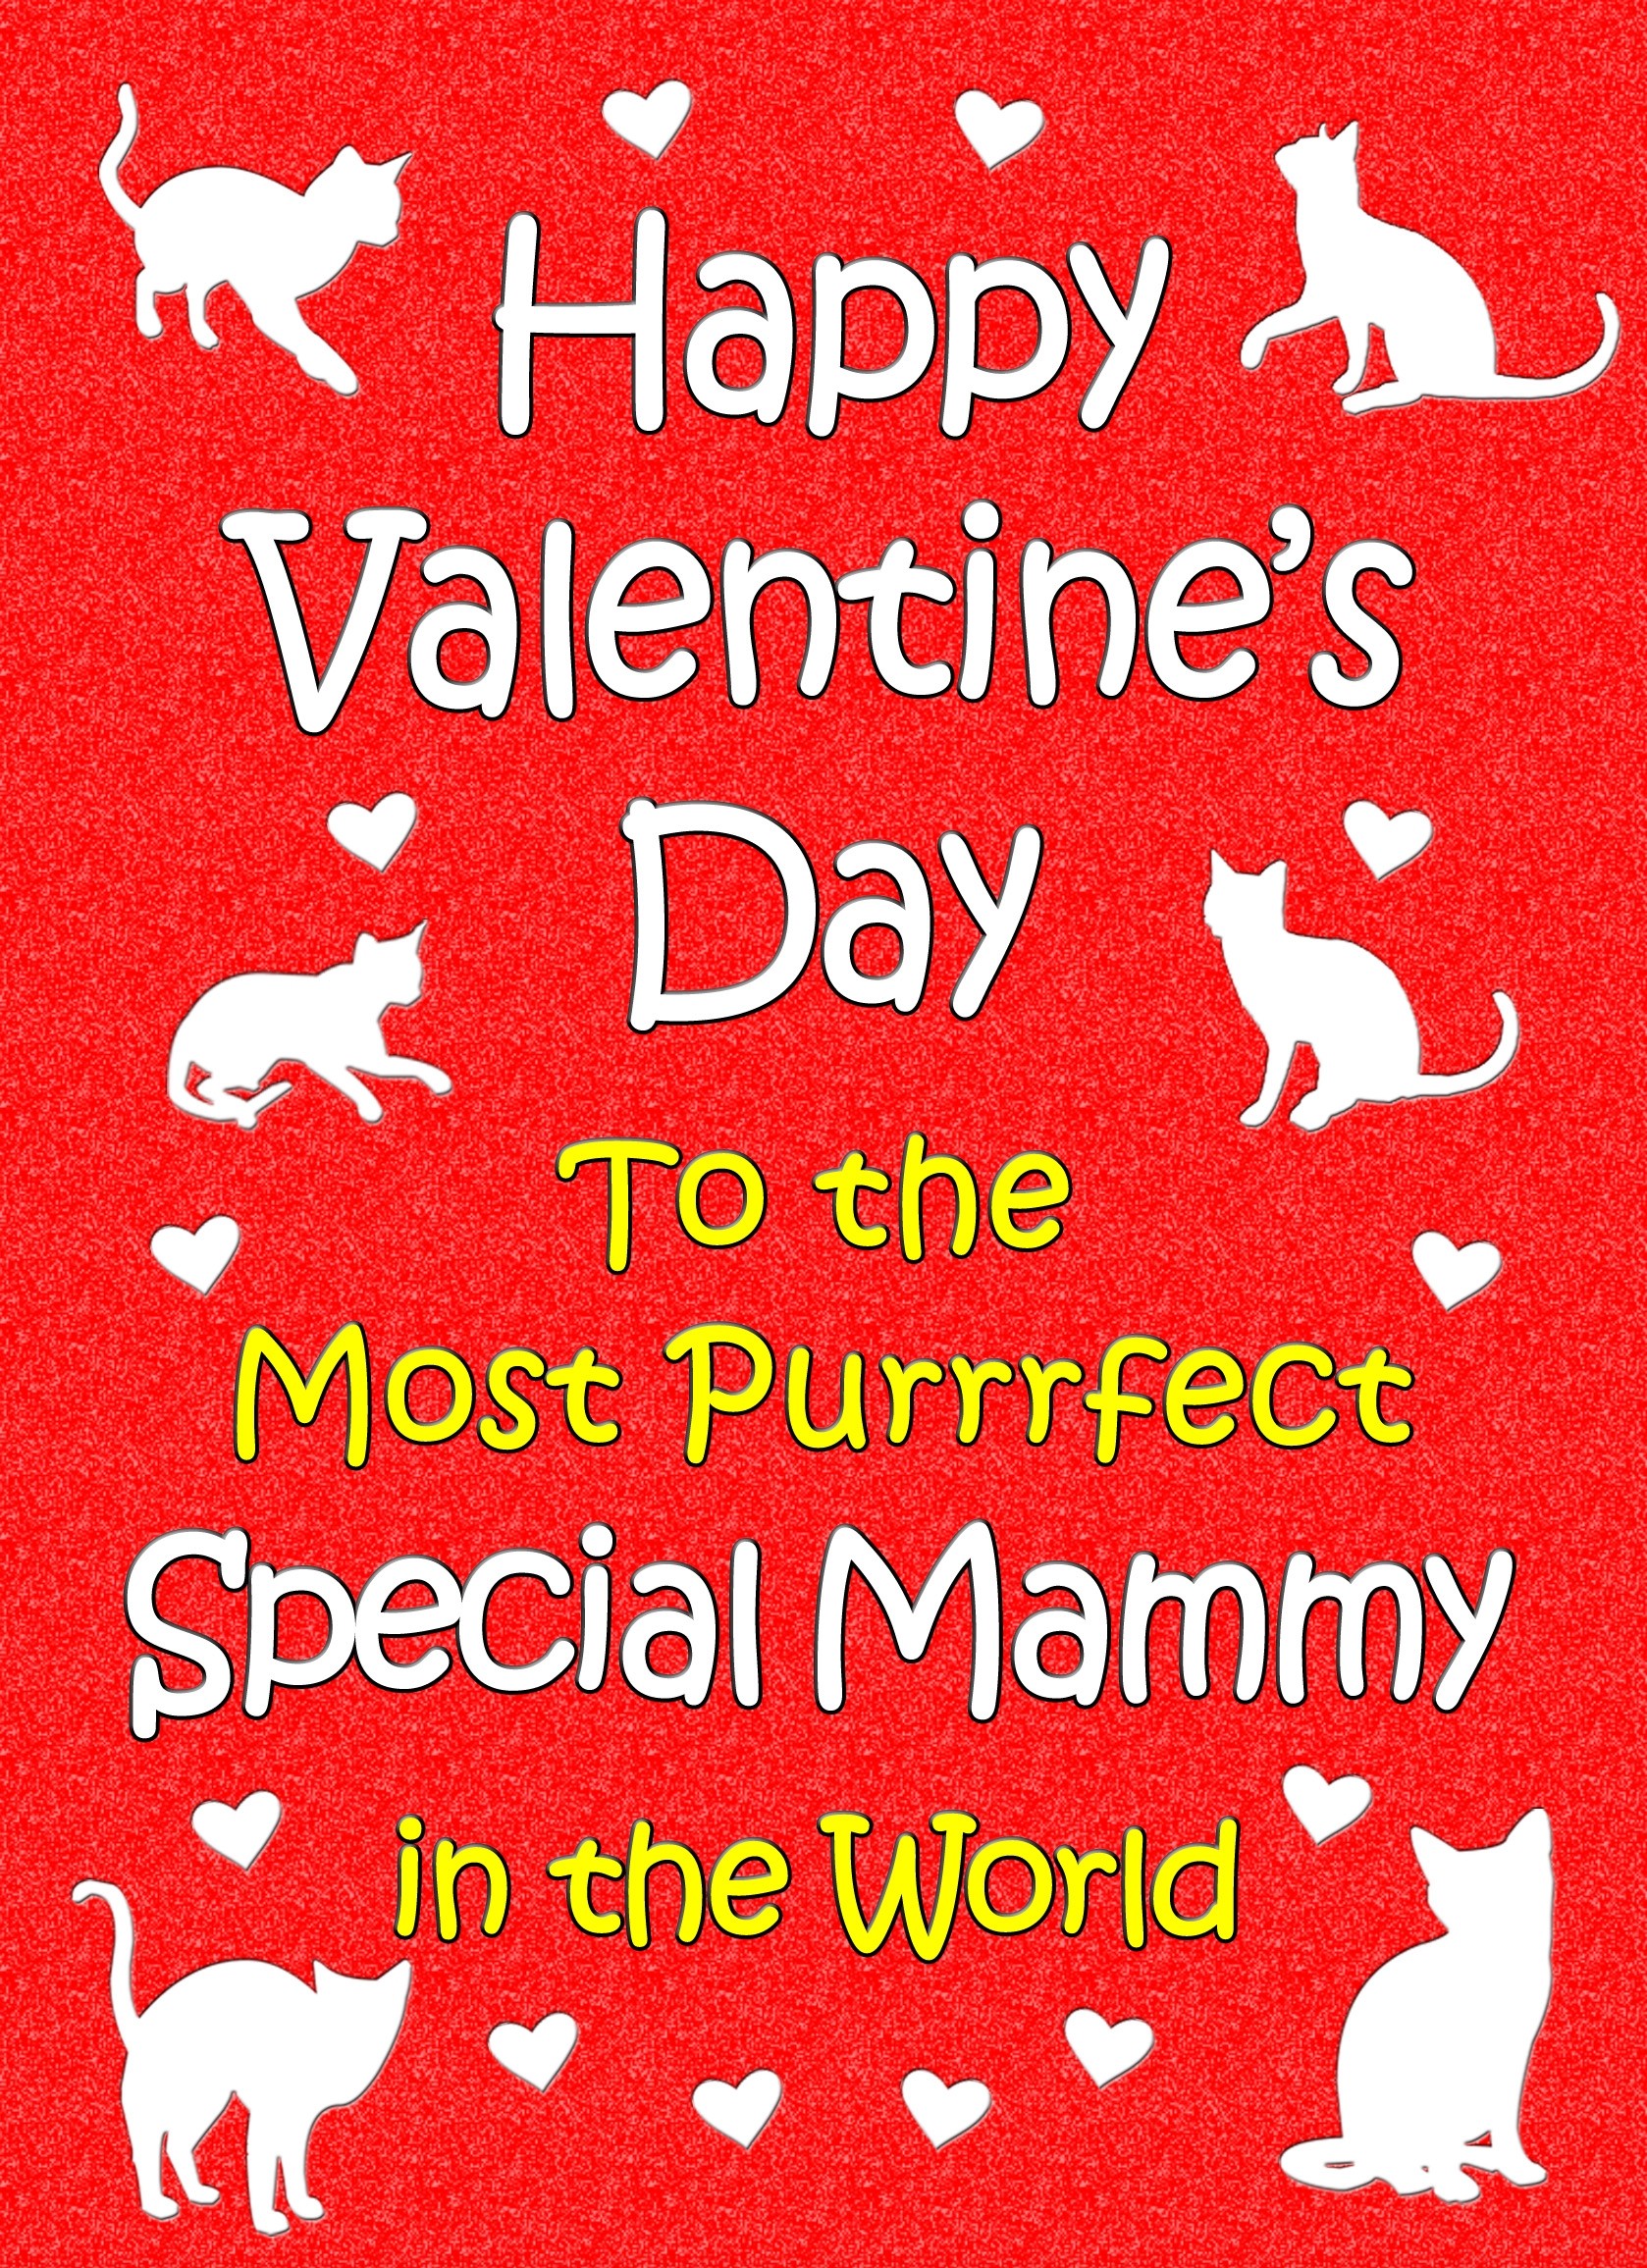 From The Cat Valentines Day Card (Special Mammy)